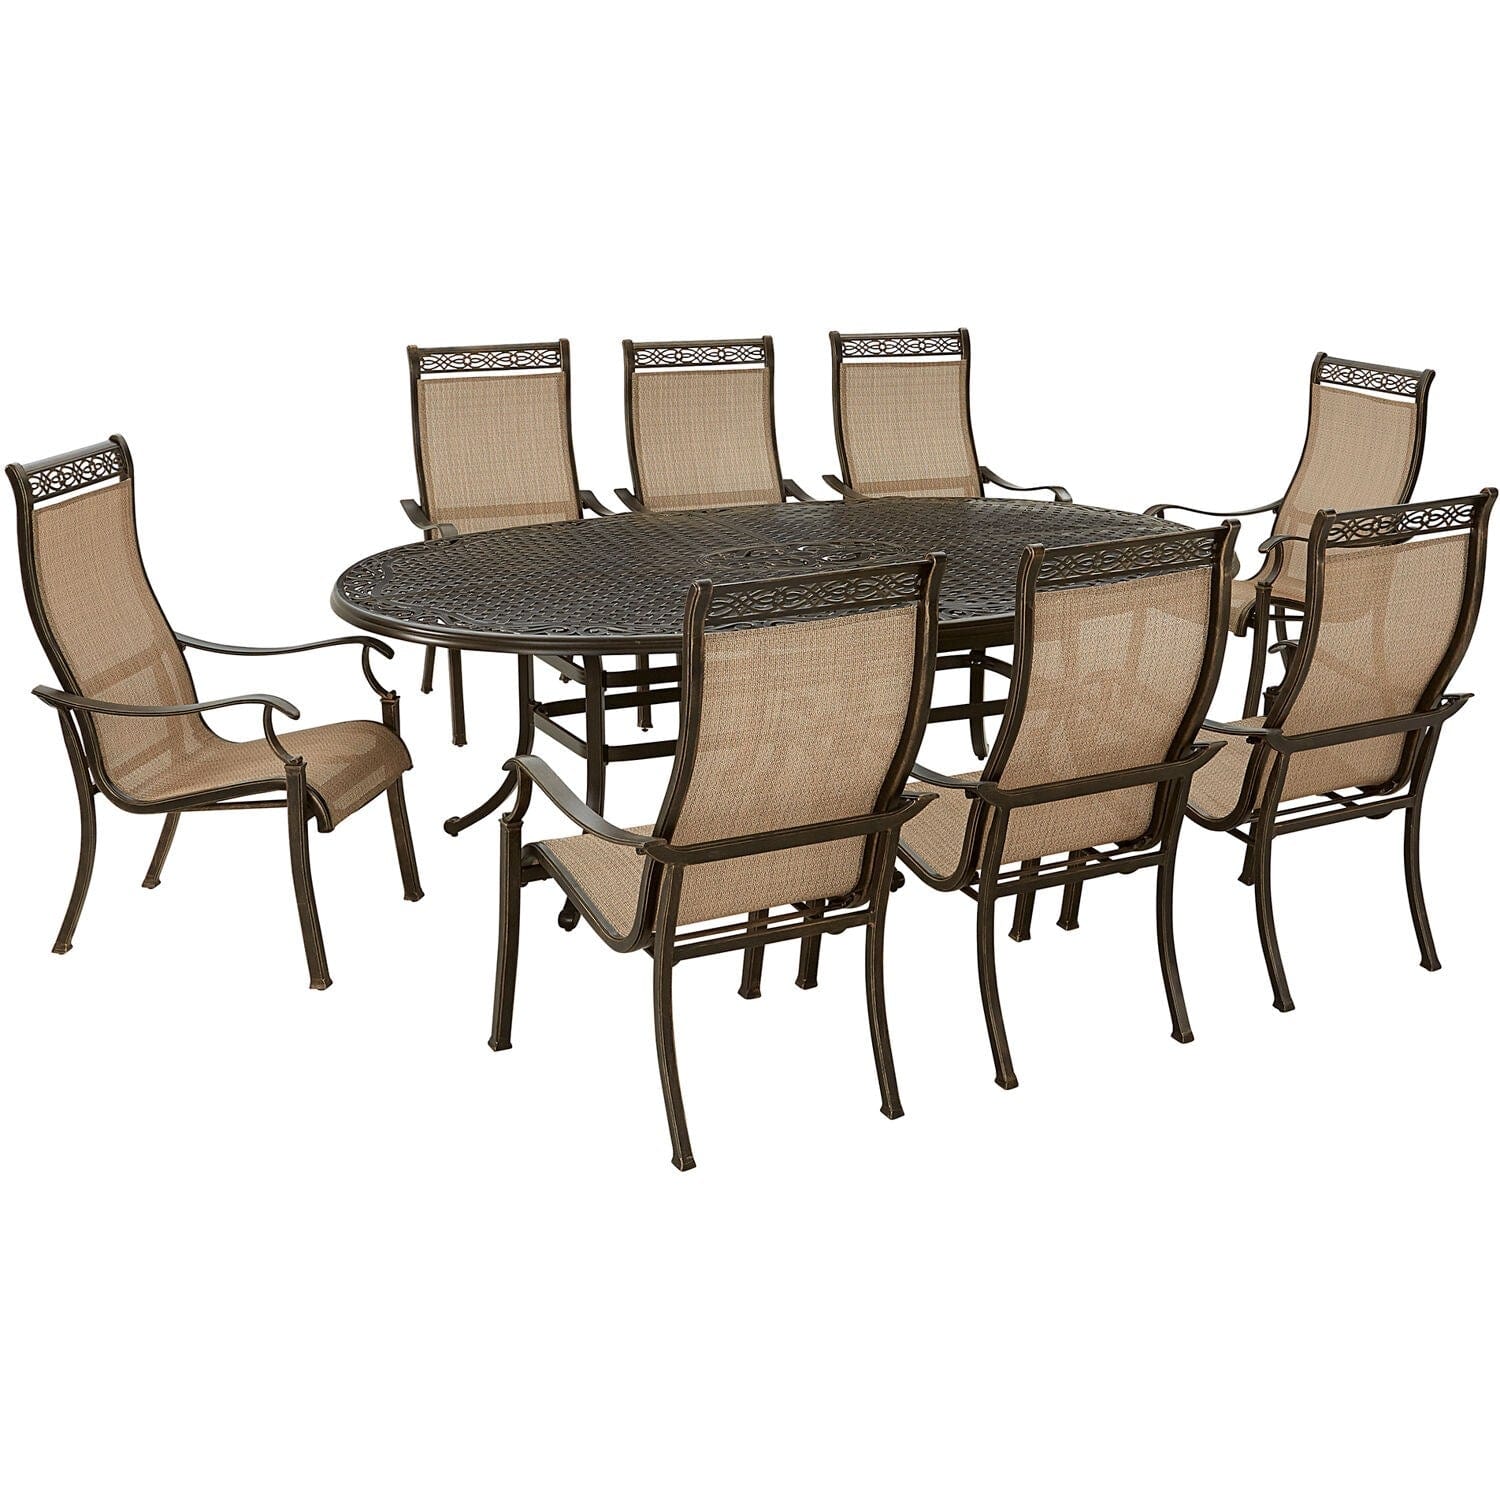 Hanover Outdoor Dining Set Hanover - Manor 9 Piece -  10 Sling Swivel Rockers, 96"x60" Oval Cast Table | MANDN9PCOVSW8